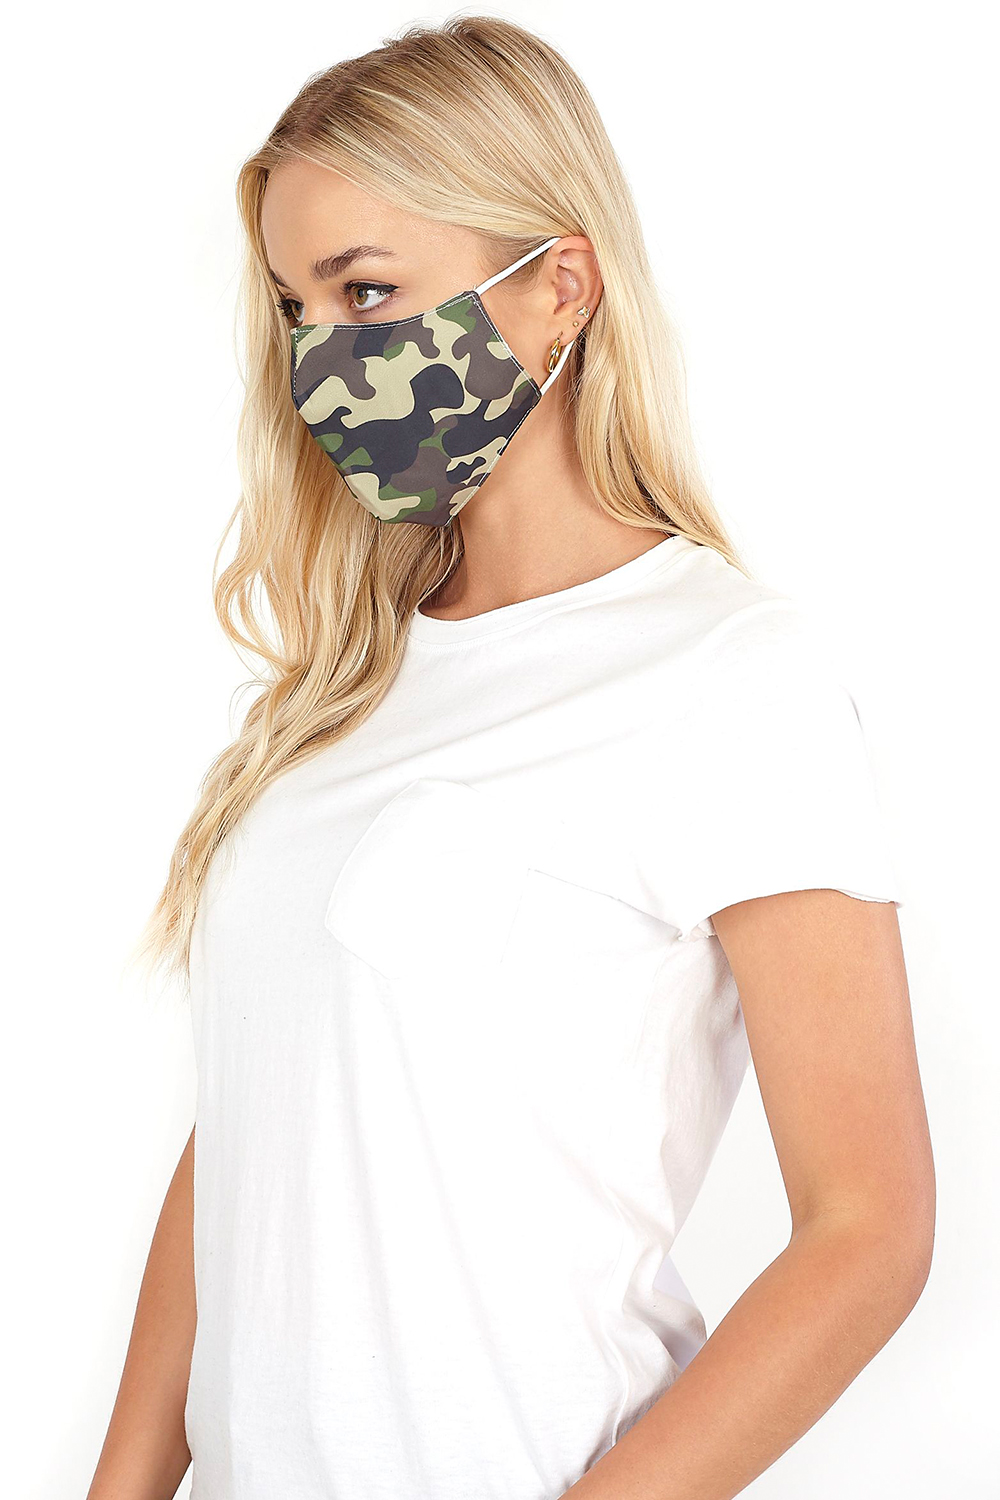 Camouflage Print Fast Drying Fashion Face Mask